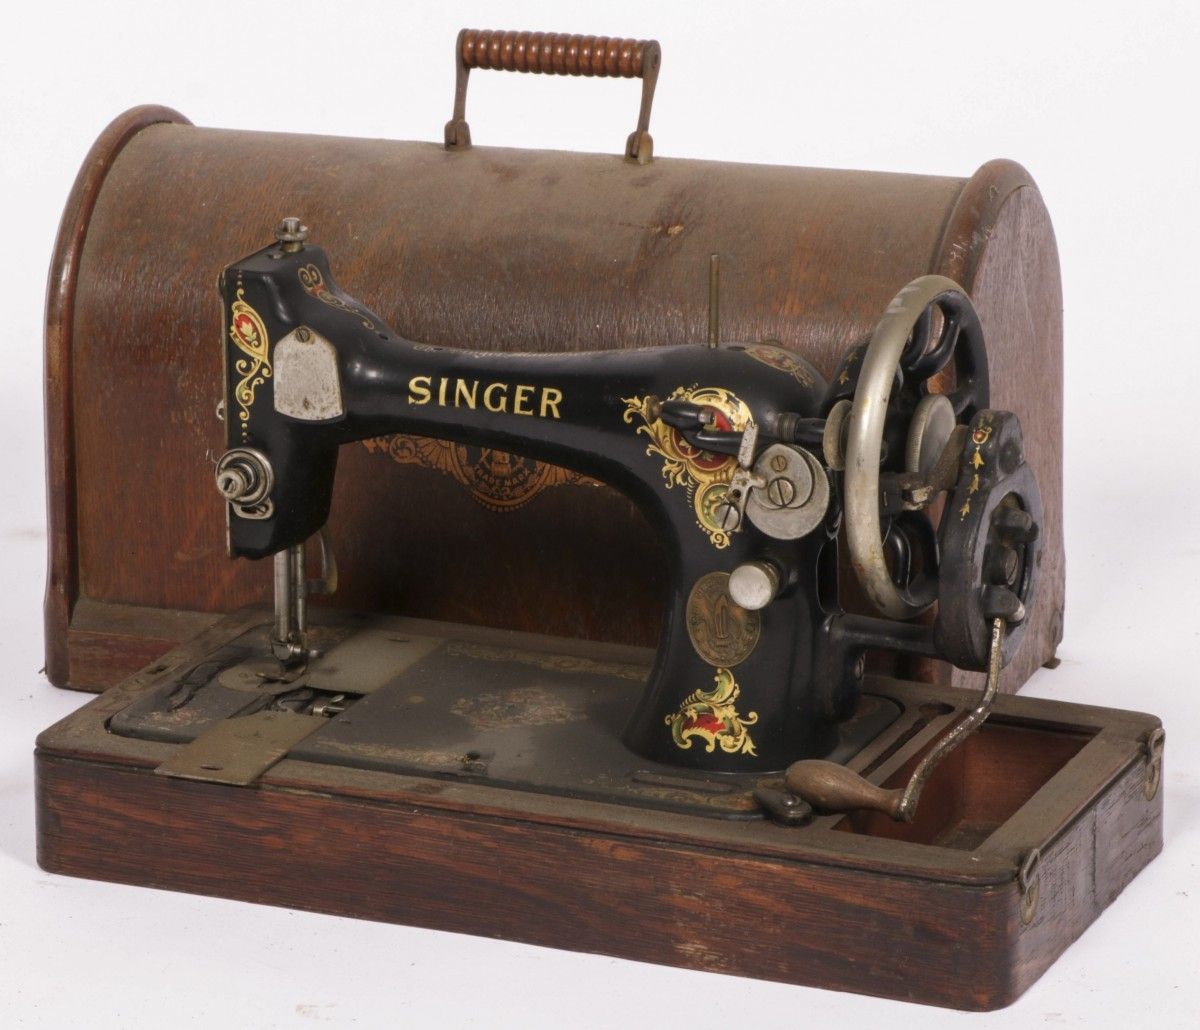 A cast iron Singer sewing machine in wooden casing, 20th century. 估计：10 - 20欧元。